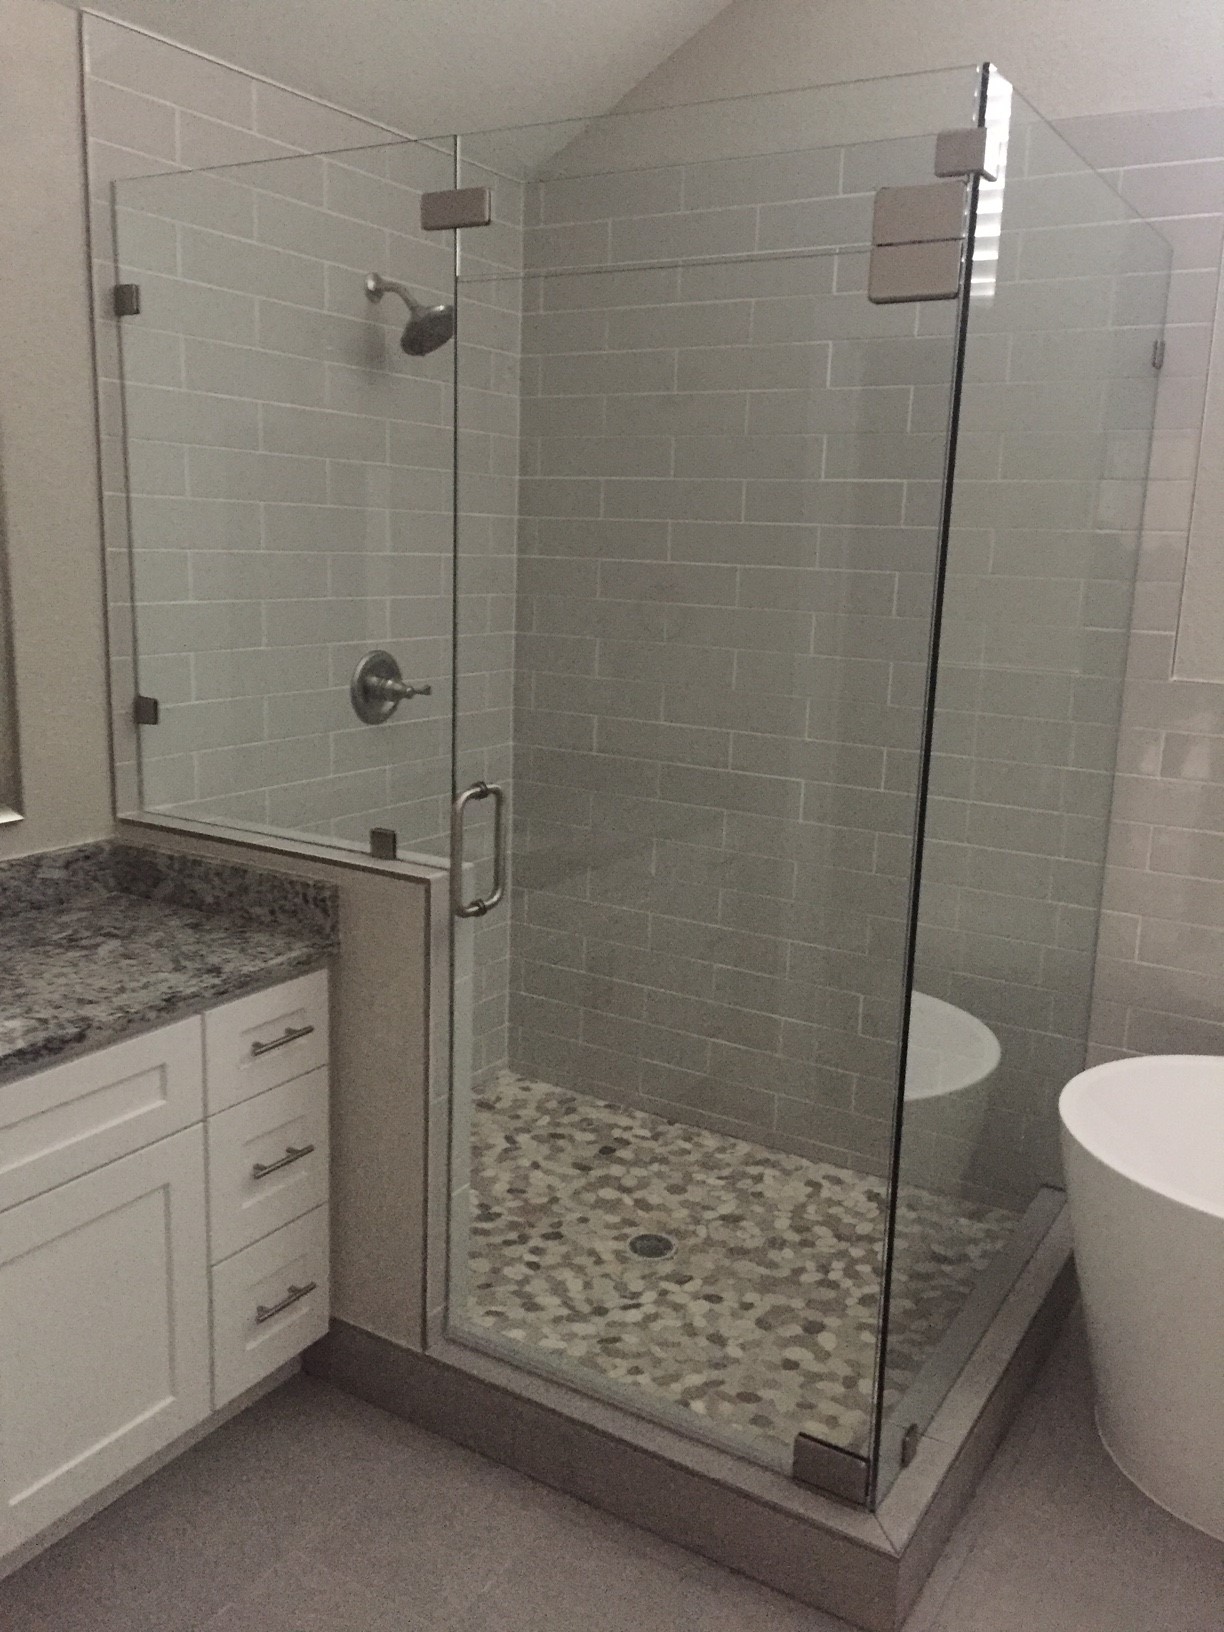 Frameless Shower Portfolio page, example pictures of our work!